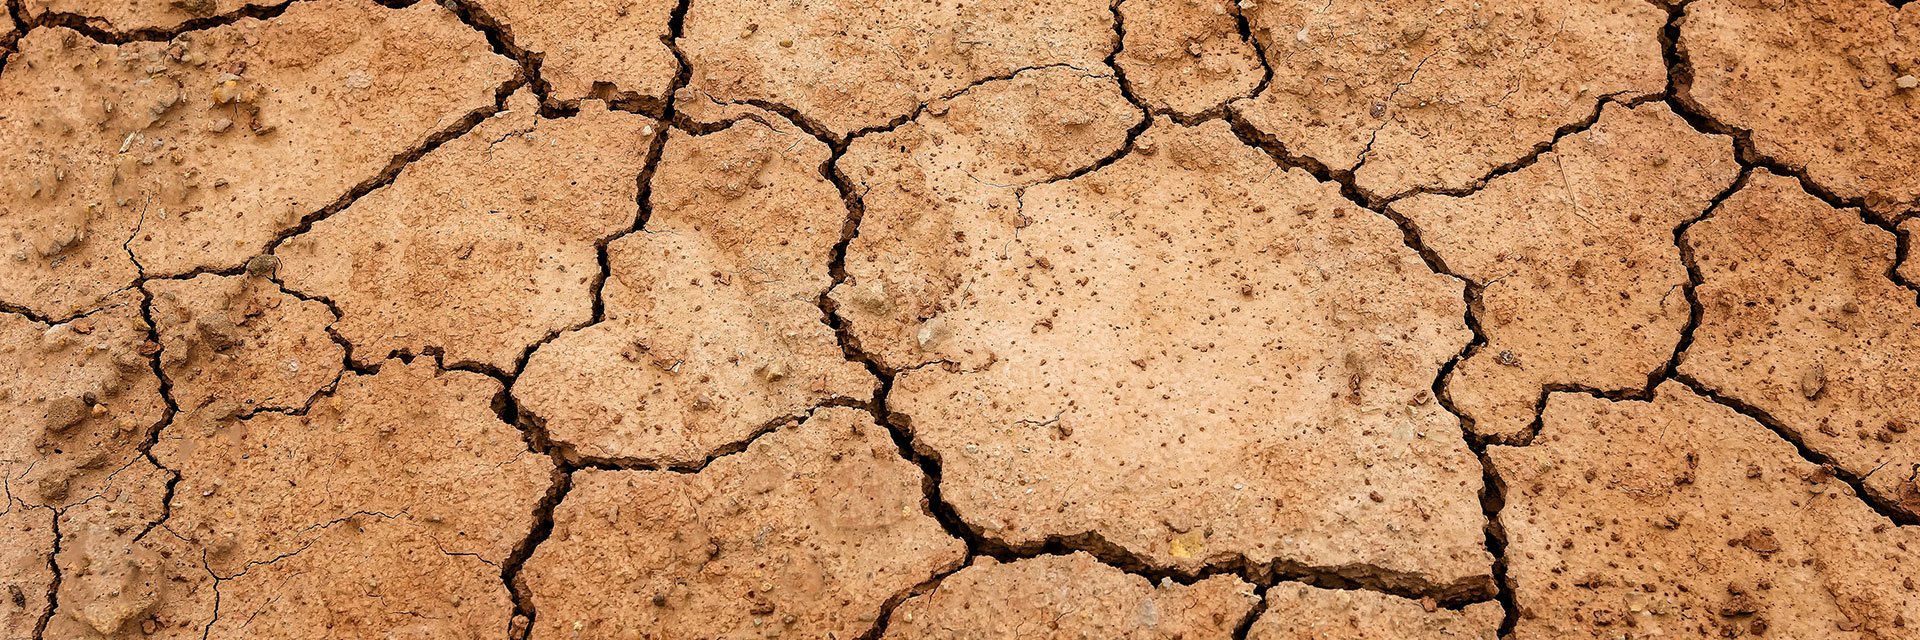 Dried earth with cracks.